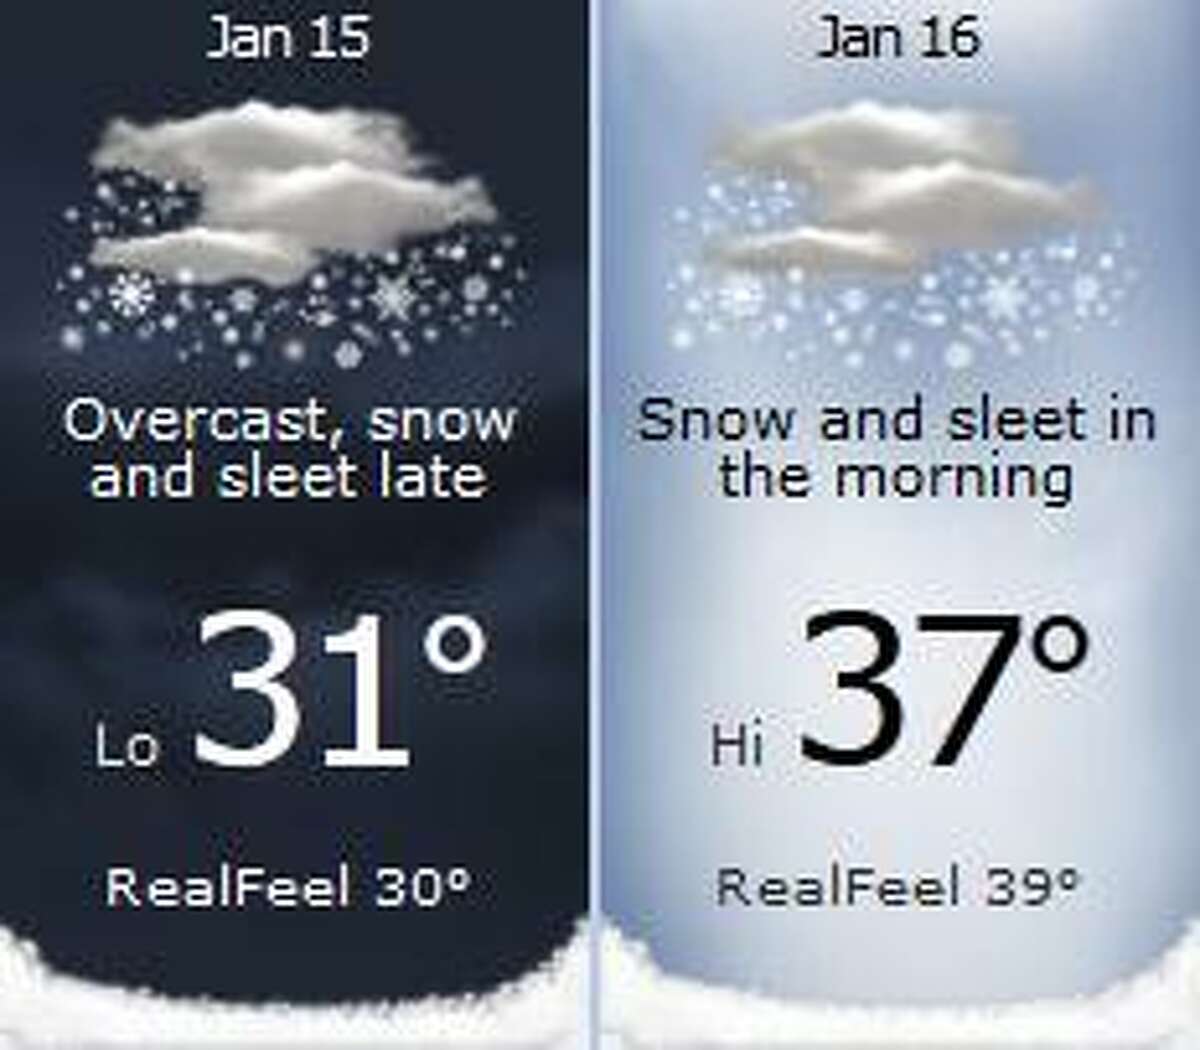 As of 9 a.m., AccuWeather expects snow and sleet to start late tonight and into Wednesday morning.